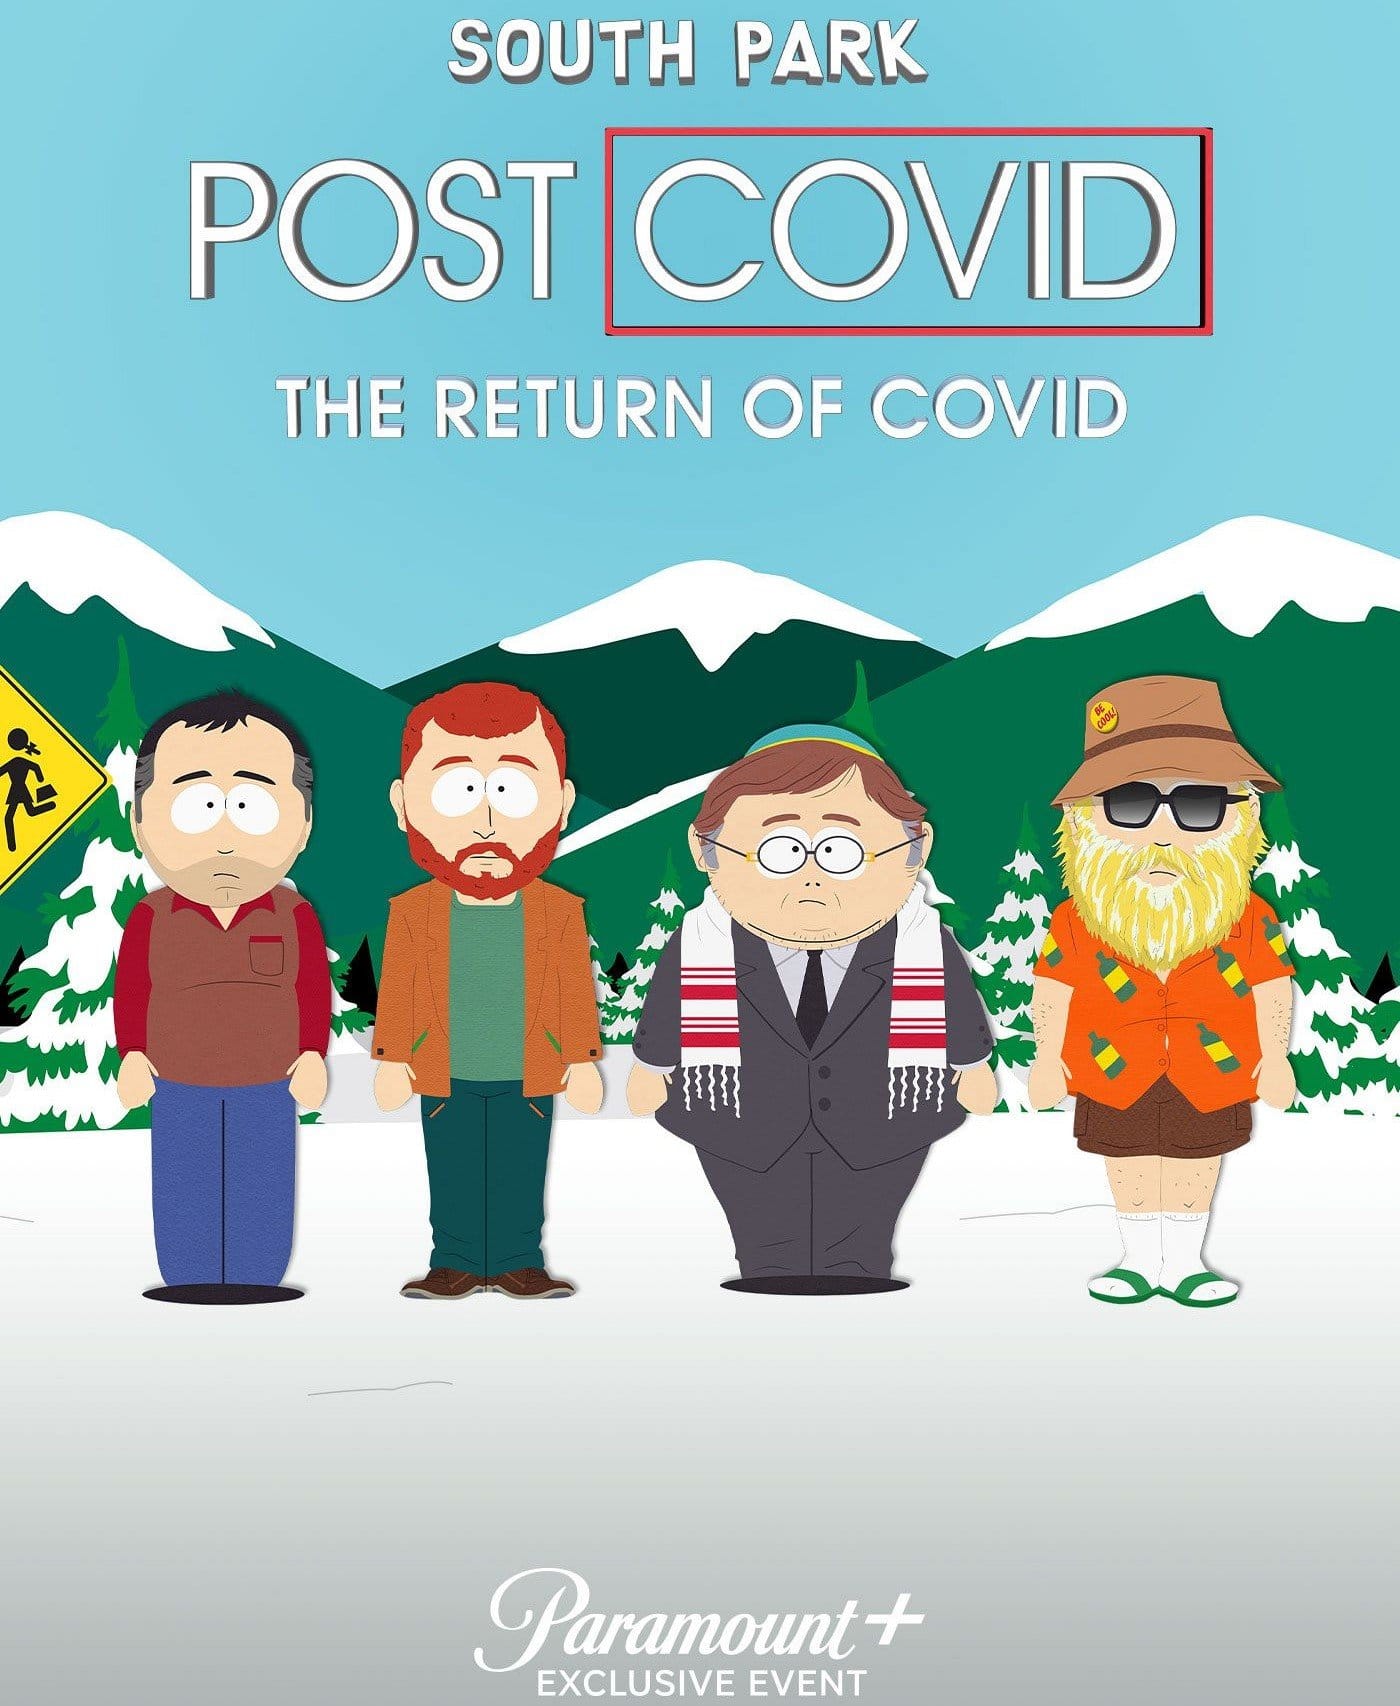 Poster for South Park special featuring NFT jokes